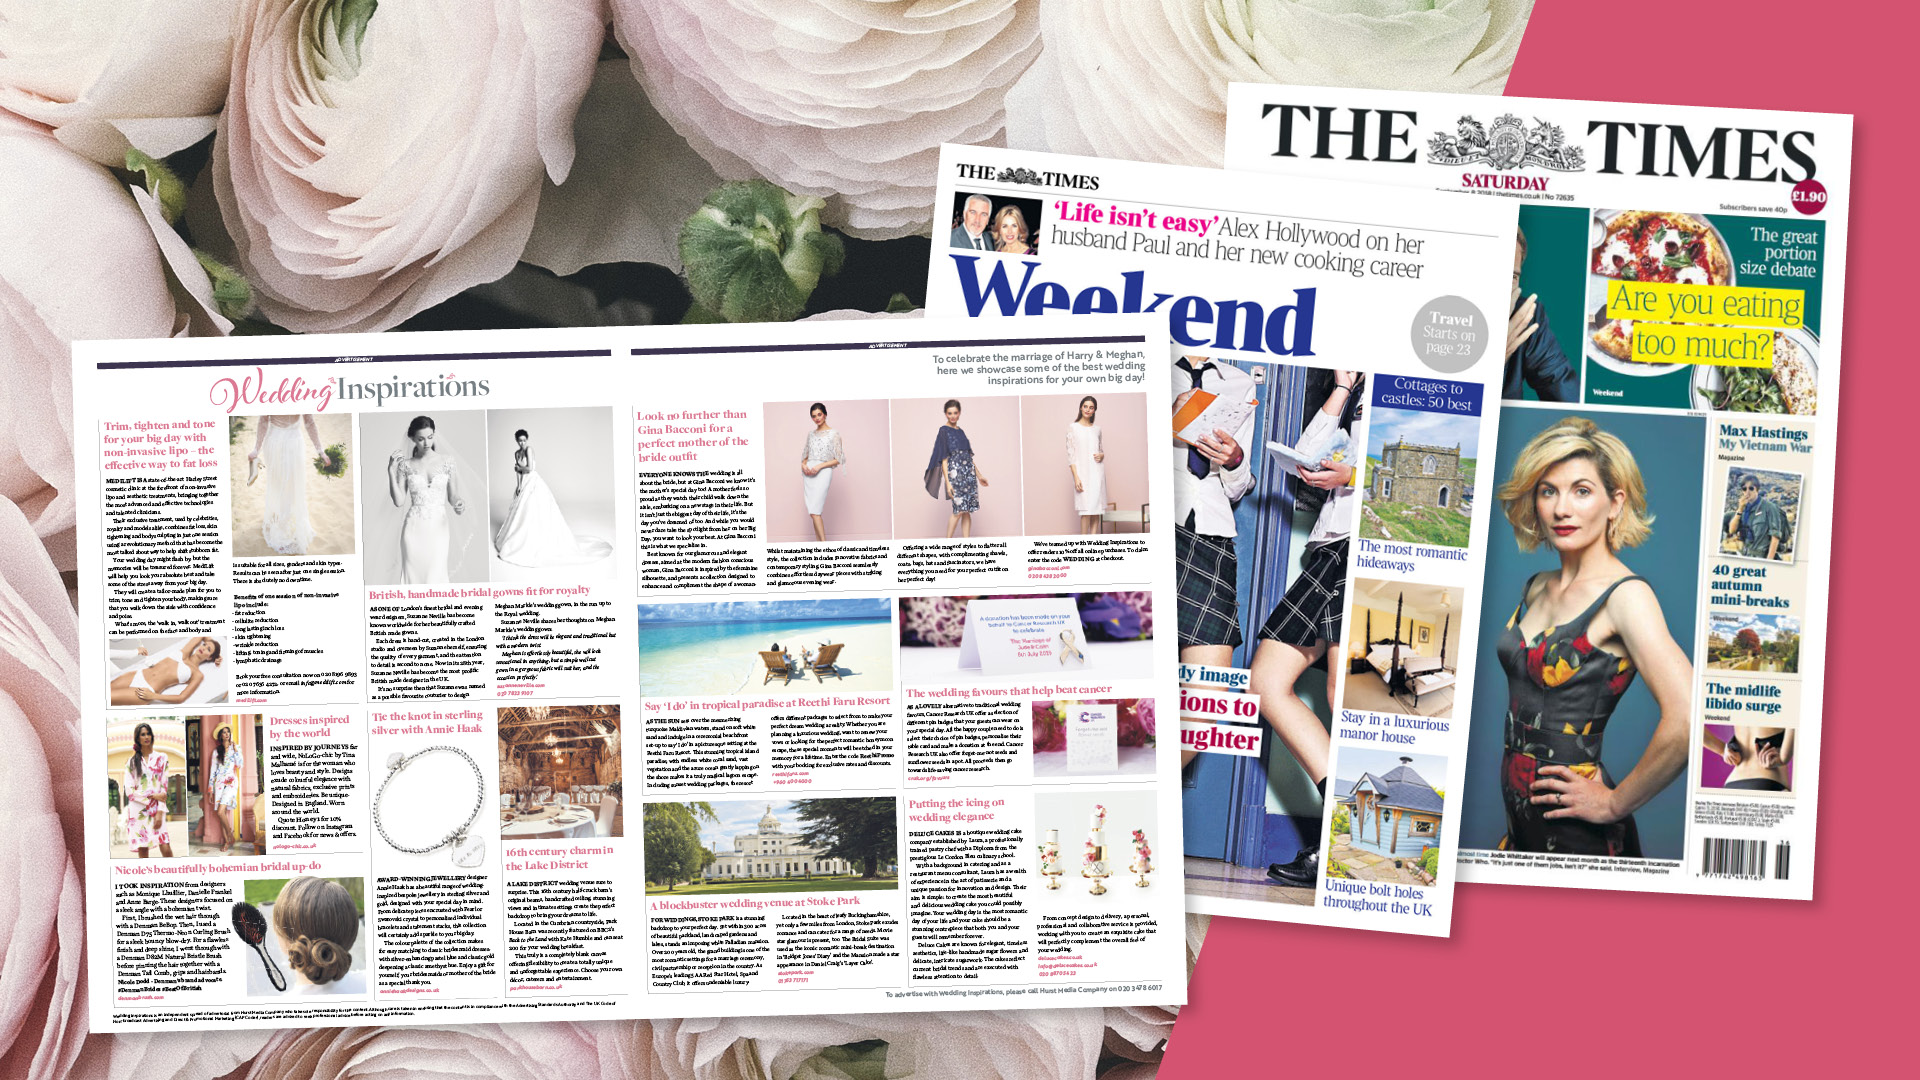 Wedding Inspirations published with The Times